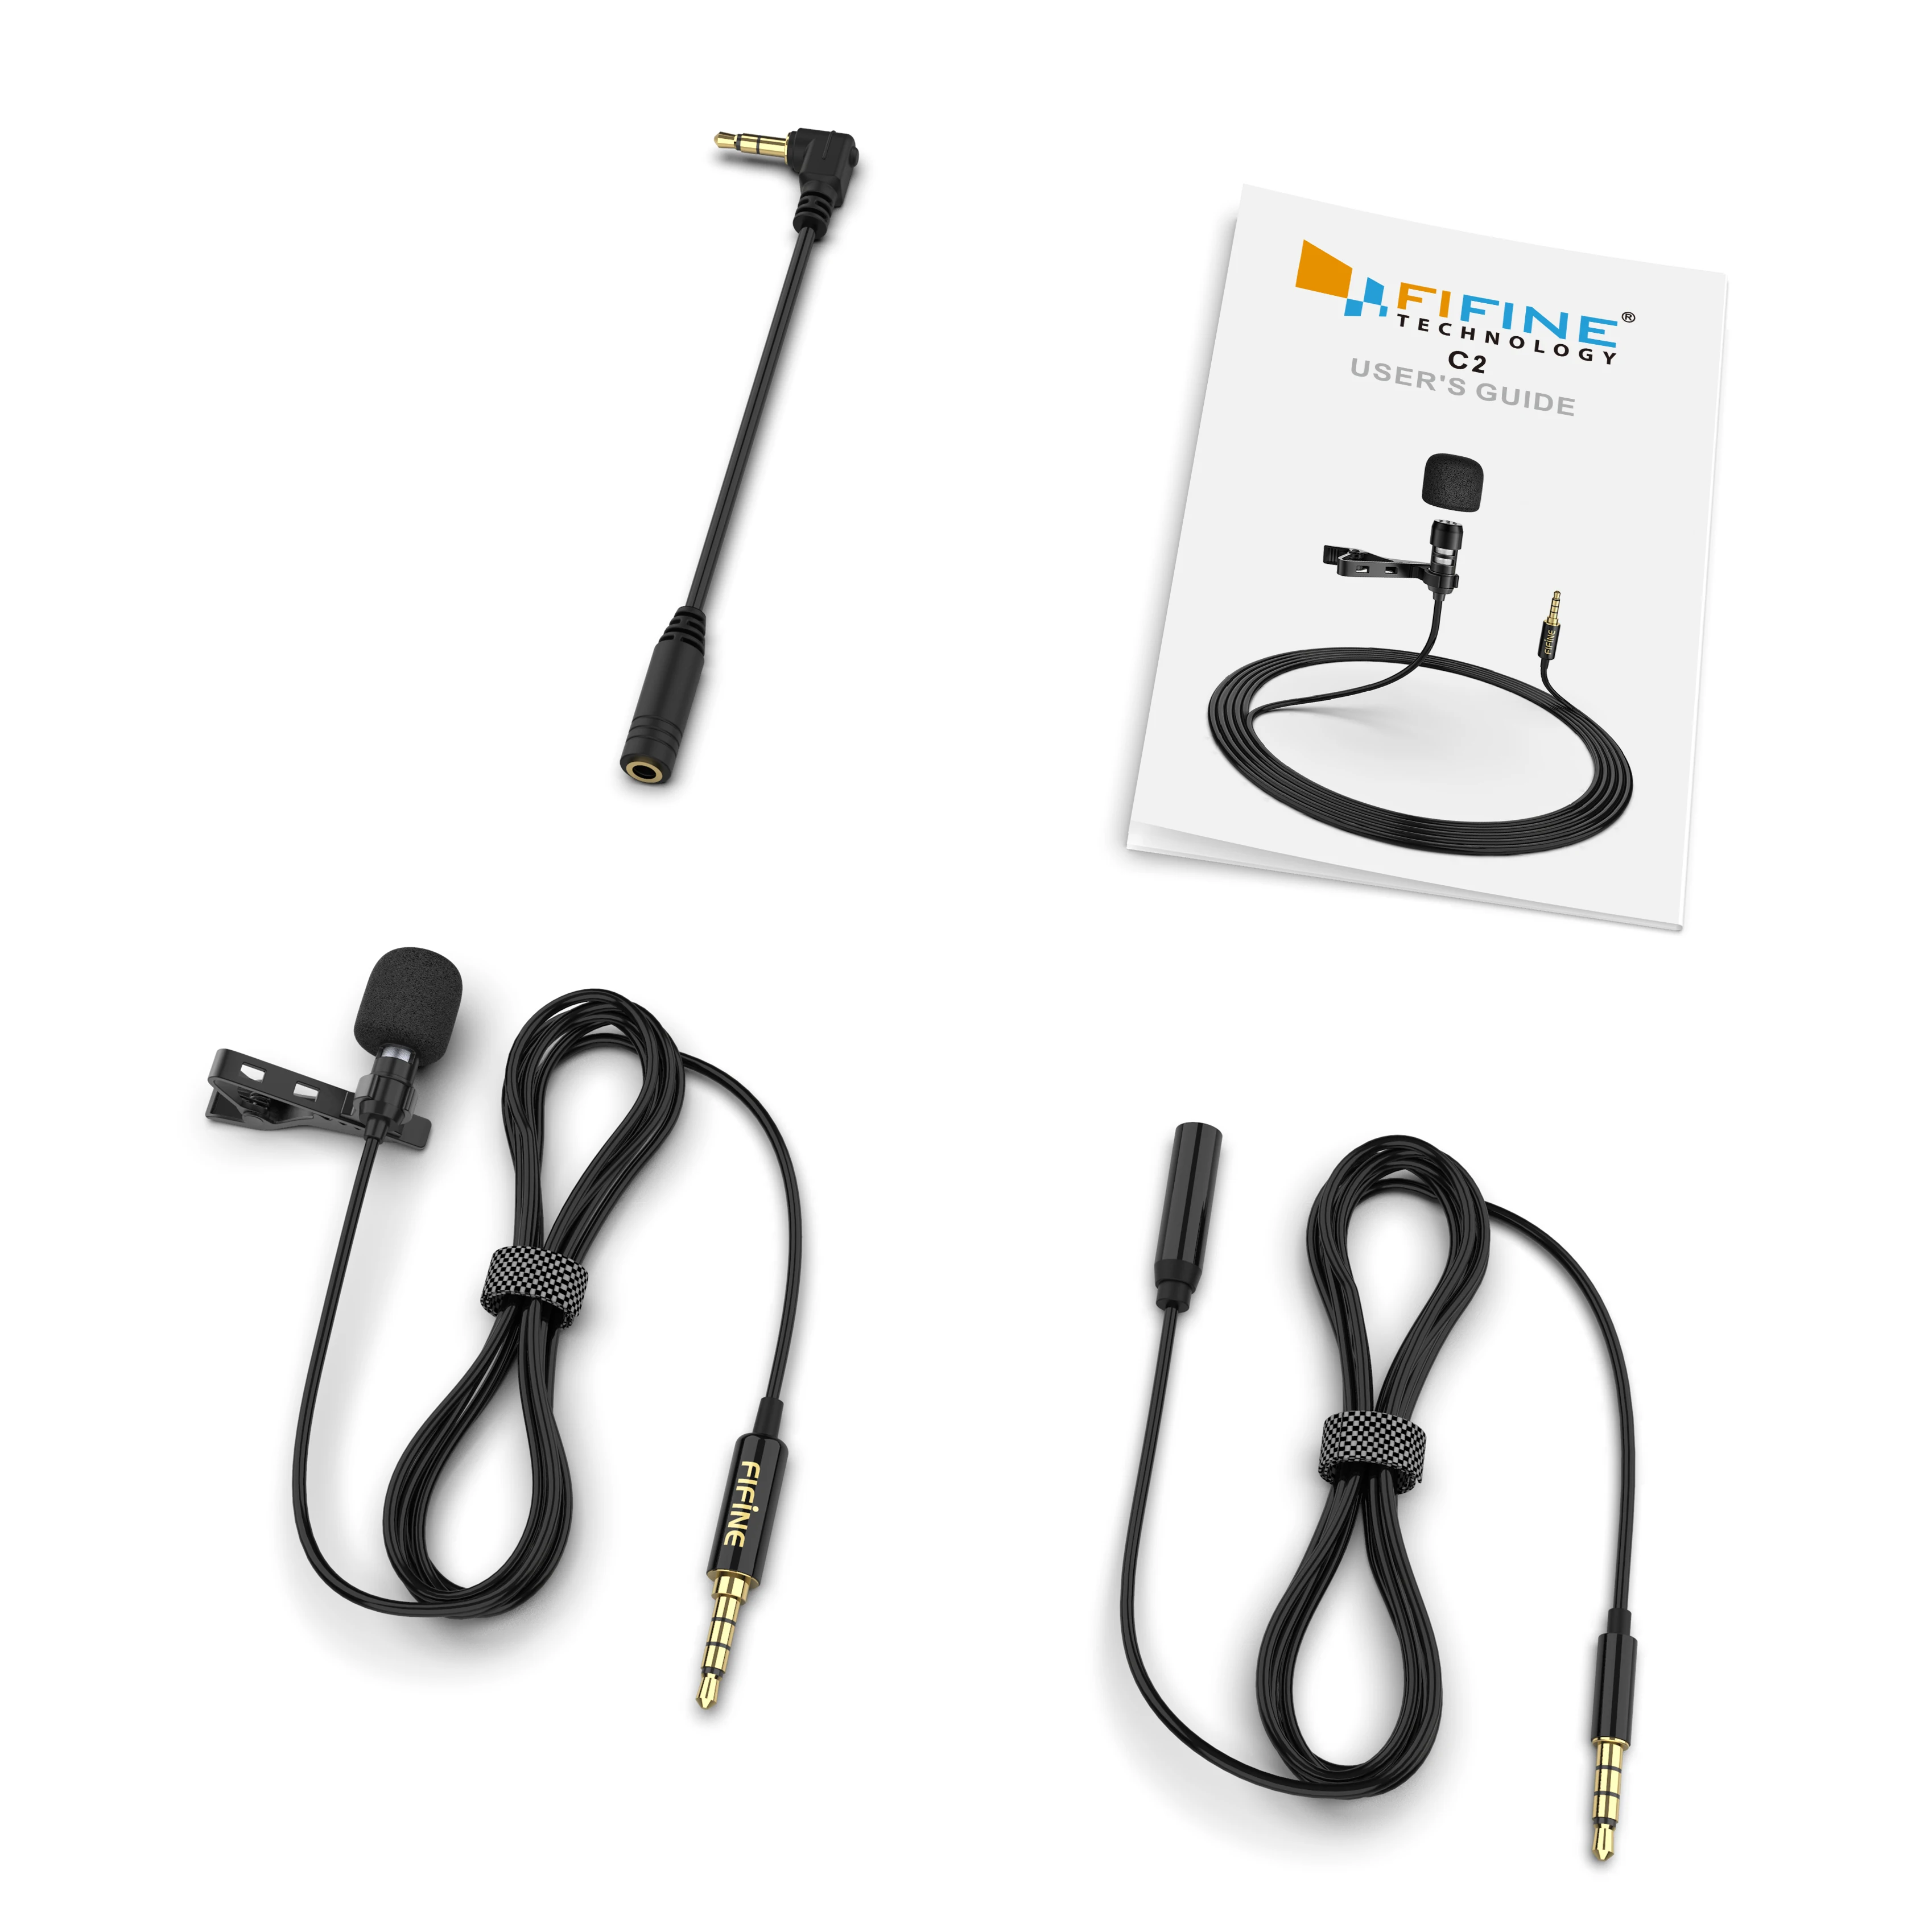 

FIFINE Lavalier Lapel Microphone for Cell Phone DSLR Camera,External Headset Mic for YouTube Vlogging Video/Interview/ Podcast